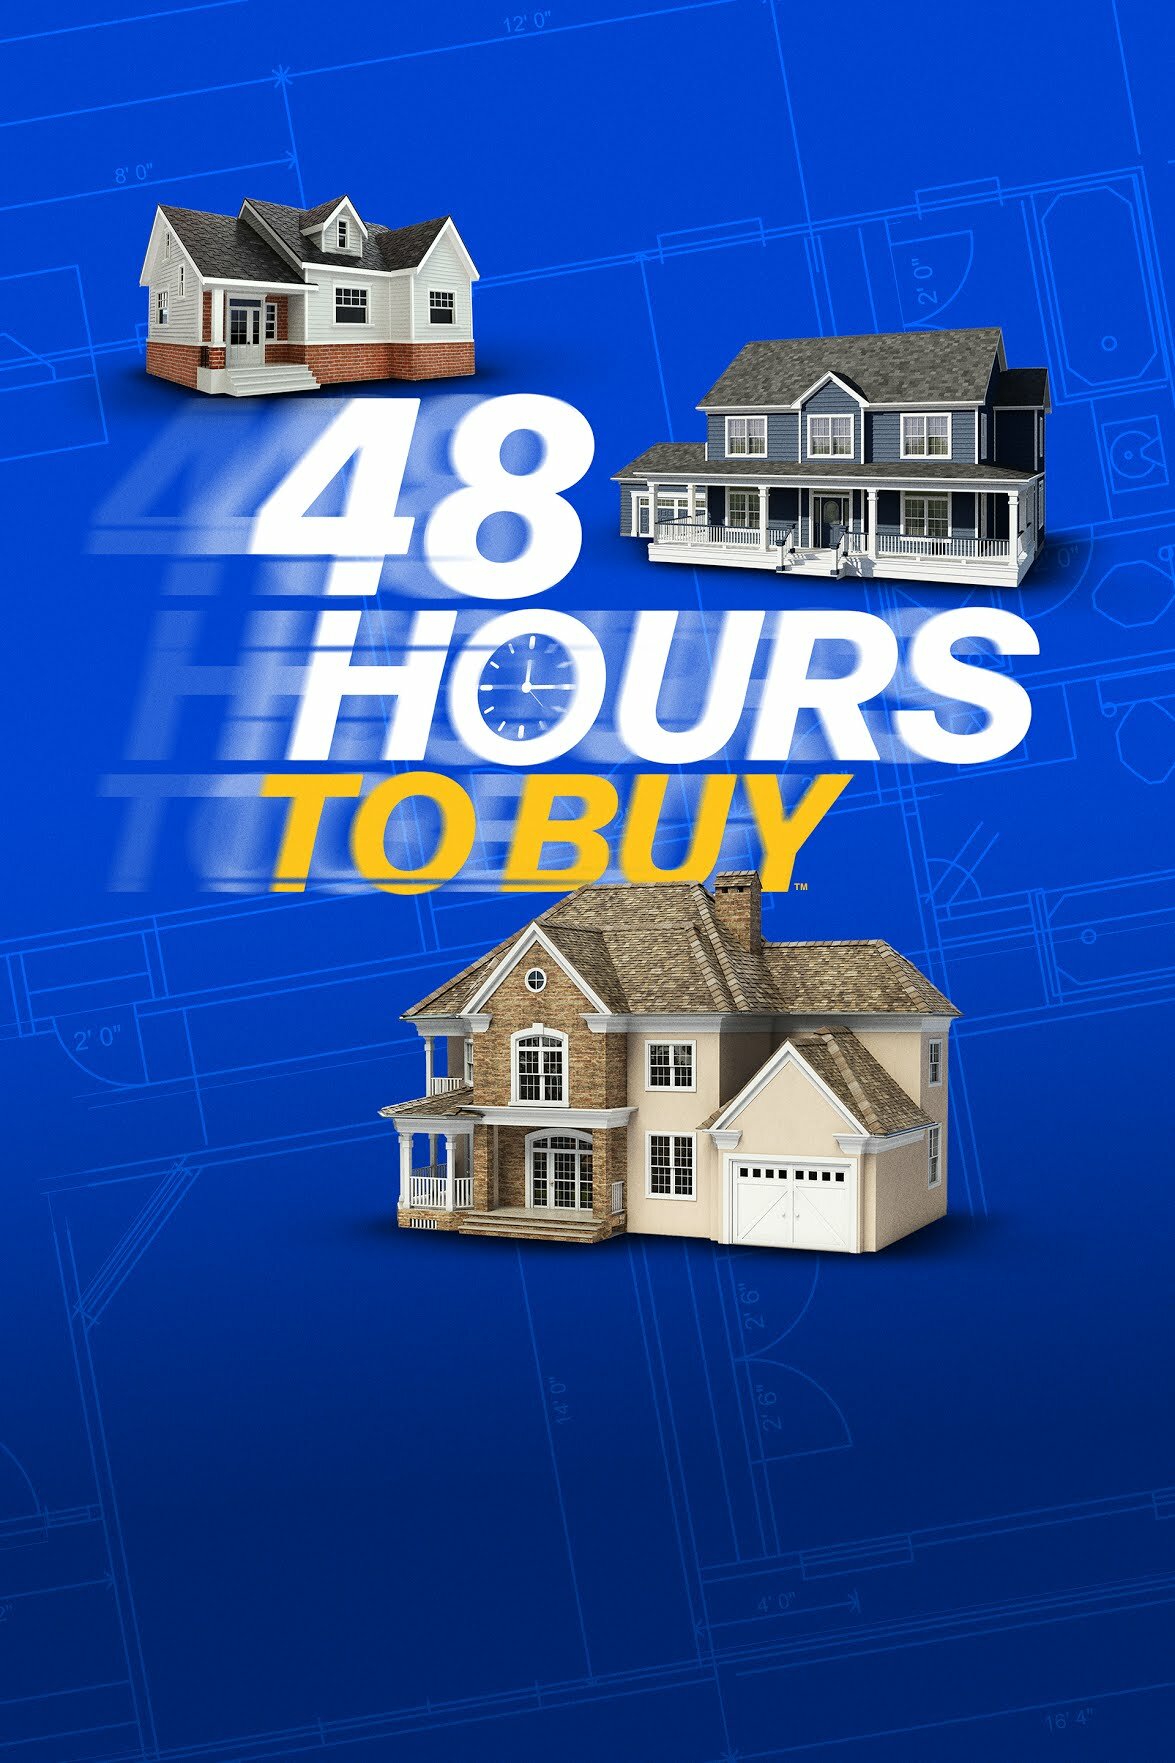 48 Hours to Buy